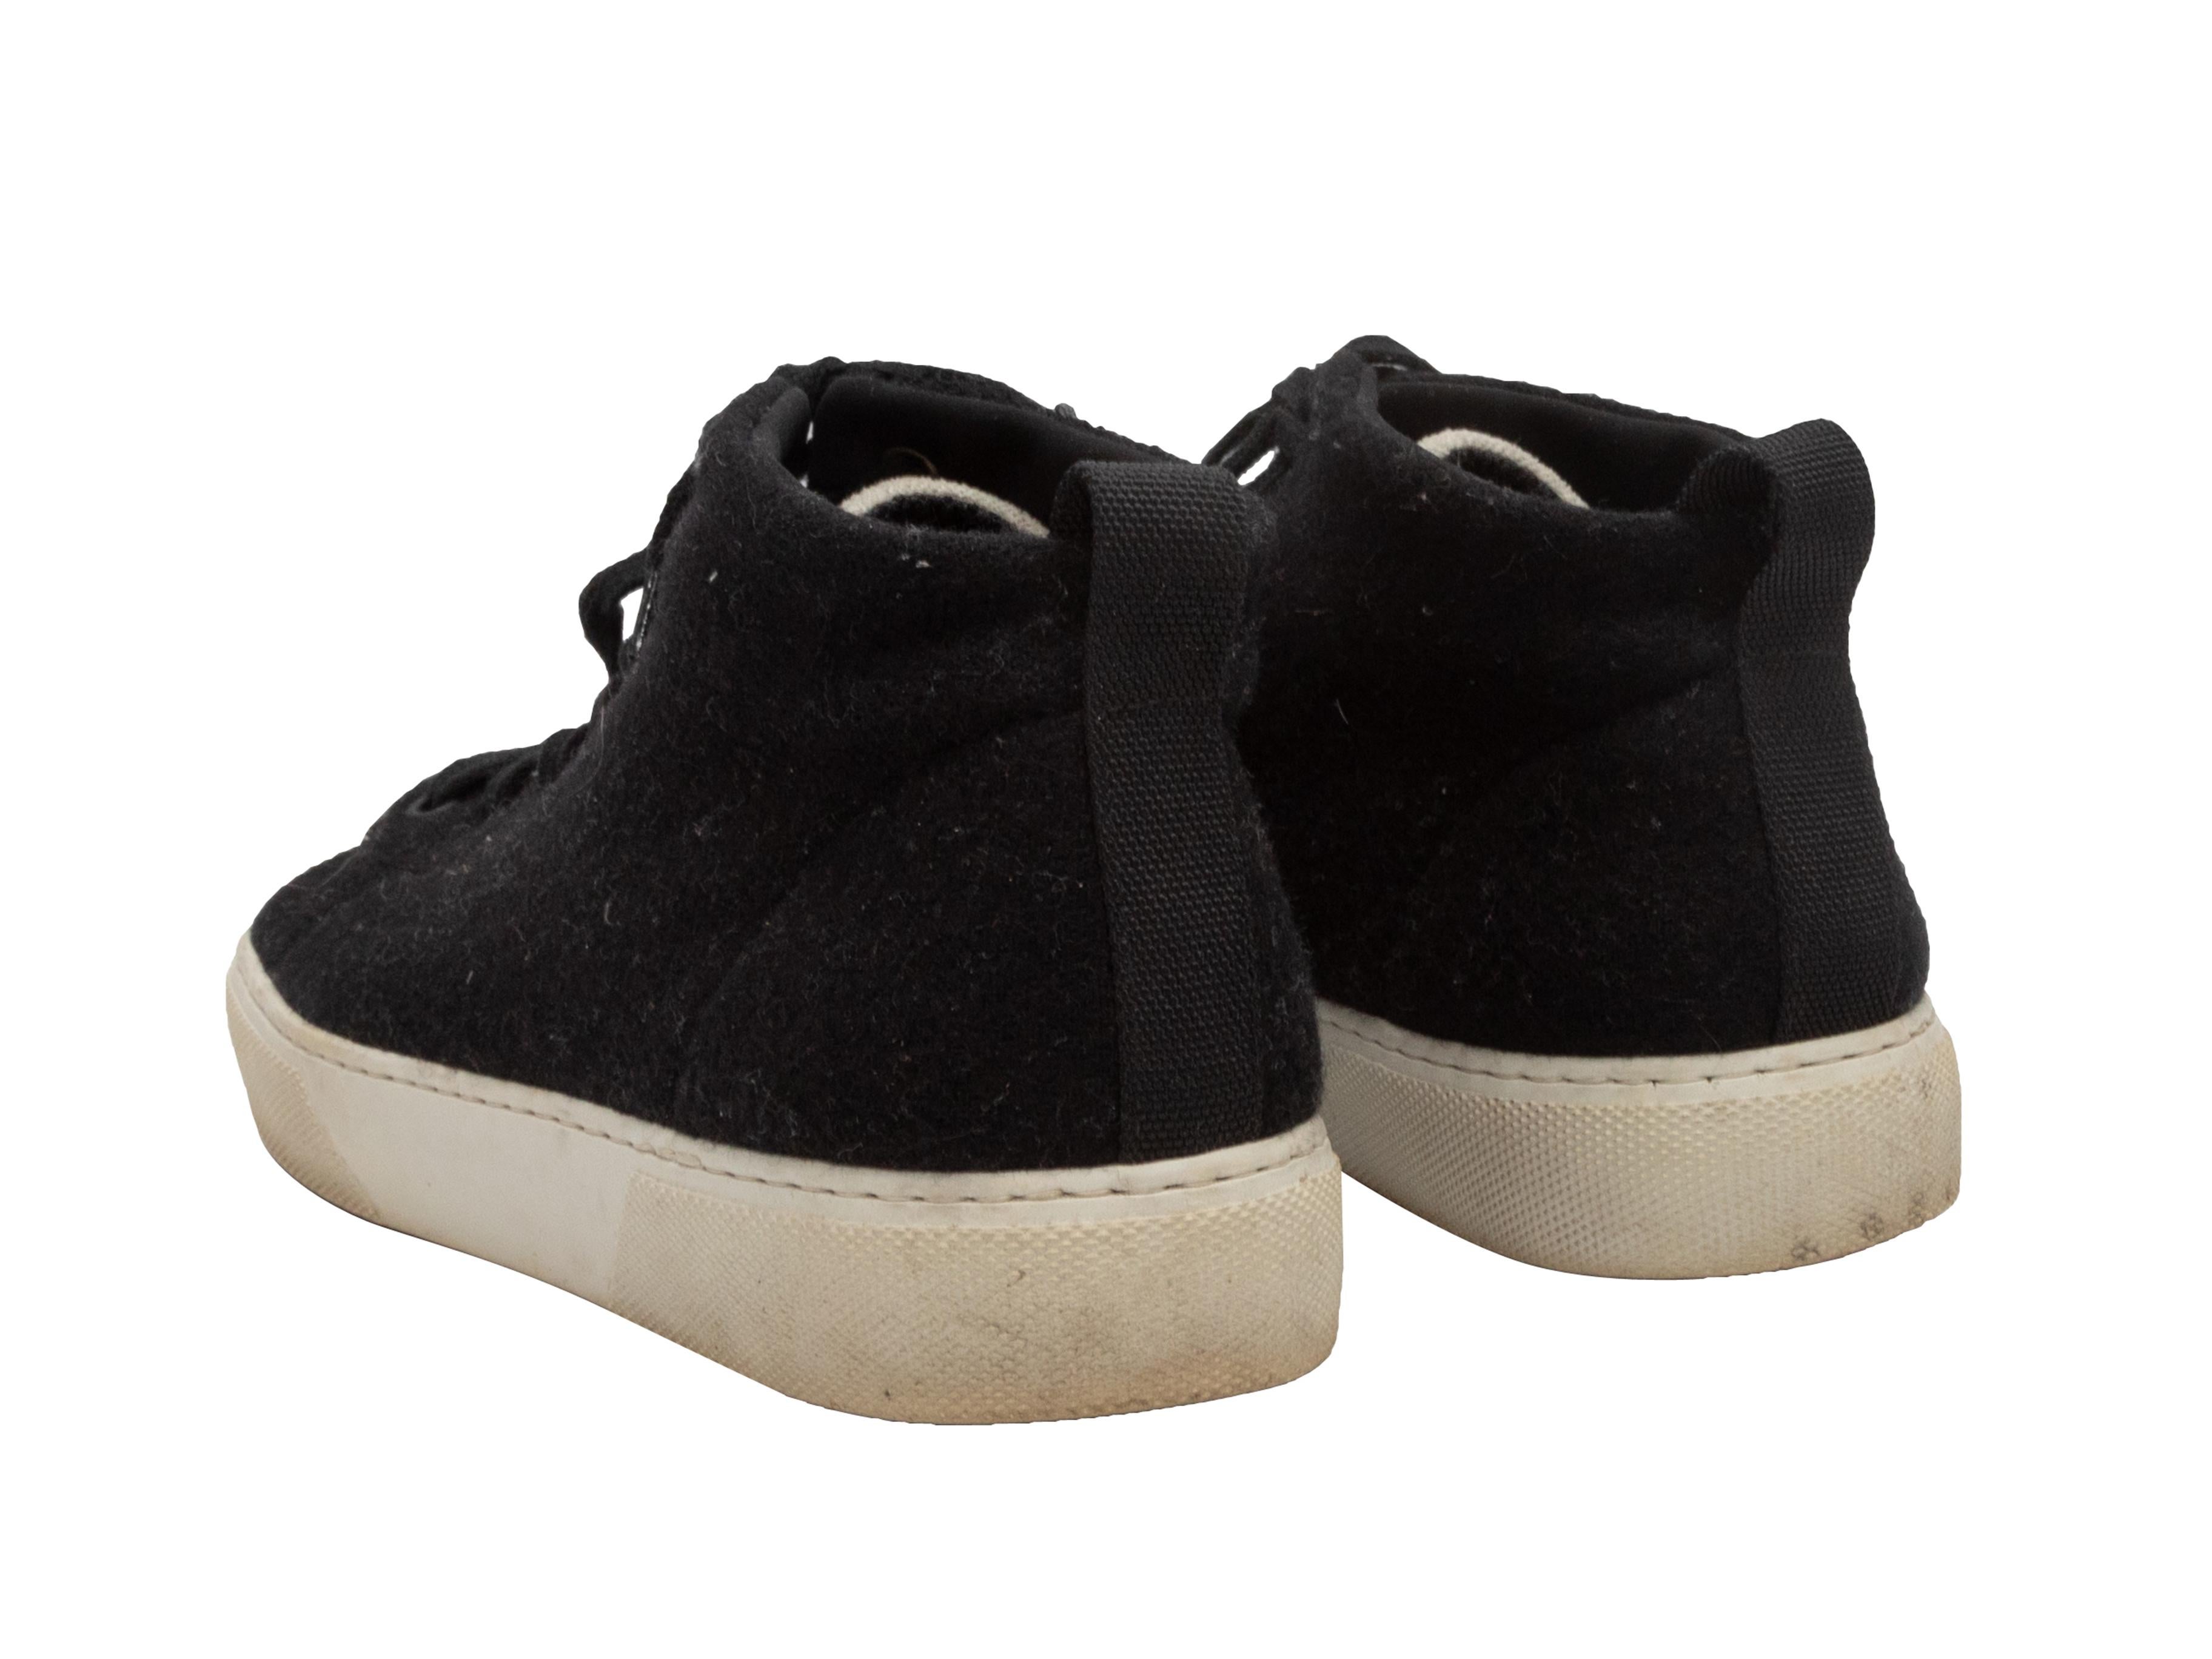 Product Details: Black and white wool high-top sneakers by James Perse. Rubber soles. Lace-up tie closures at tops. 2.75